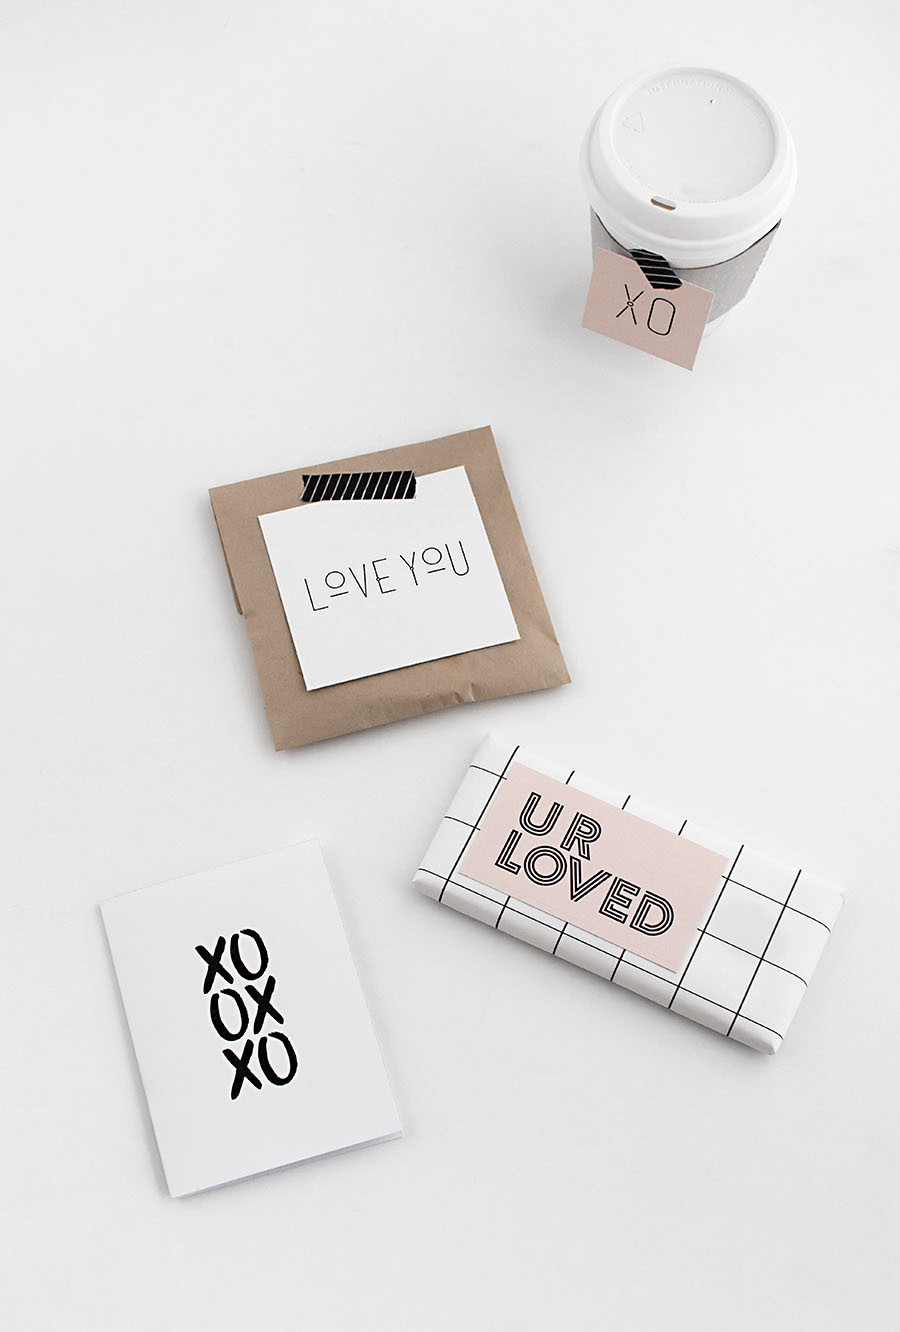 Printable Valentines + Canon Printer Giveaway - Homey Oh My